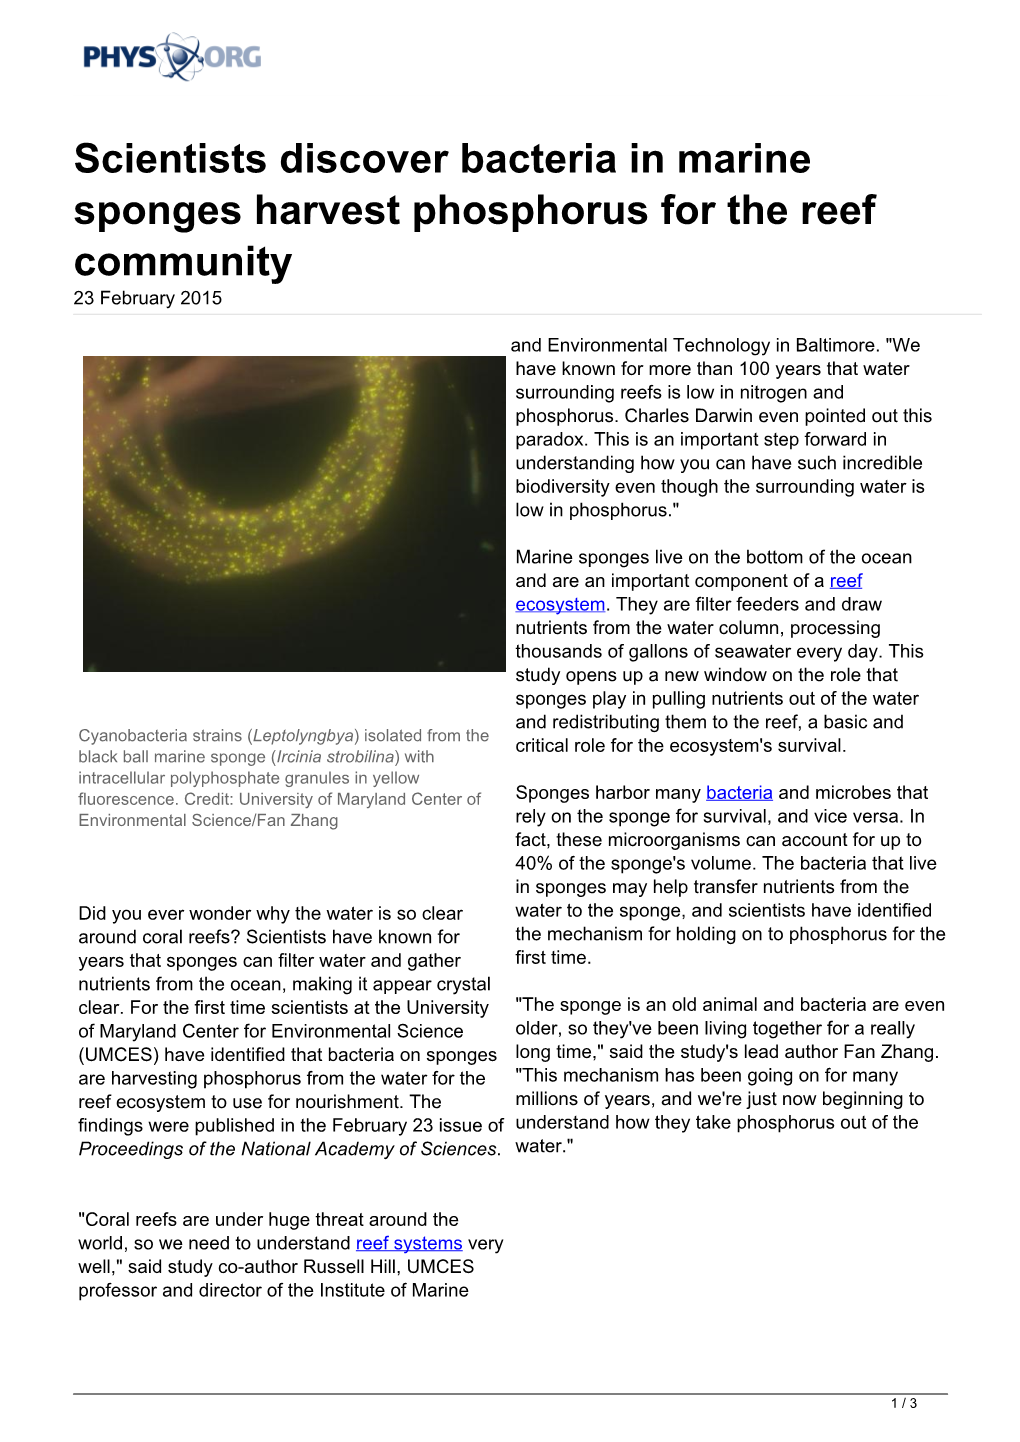 Scientists Discover Bacteria in Marine Sponges Harvest Phosphorus for the Reef Community 23 February 2015